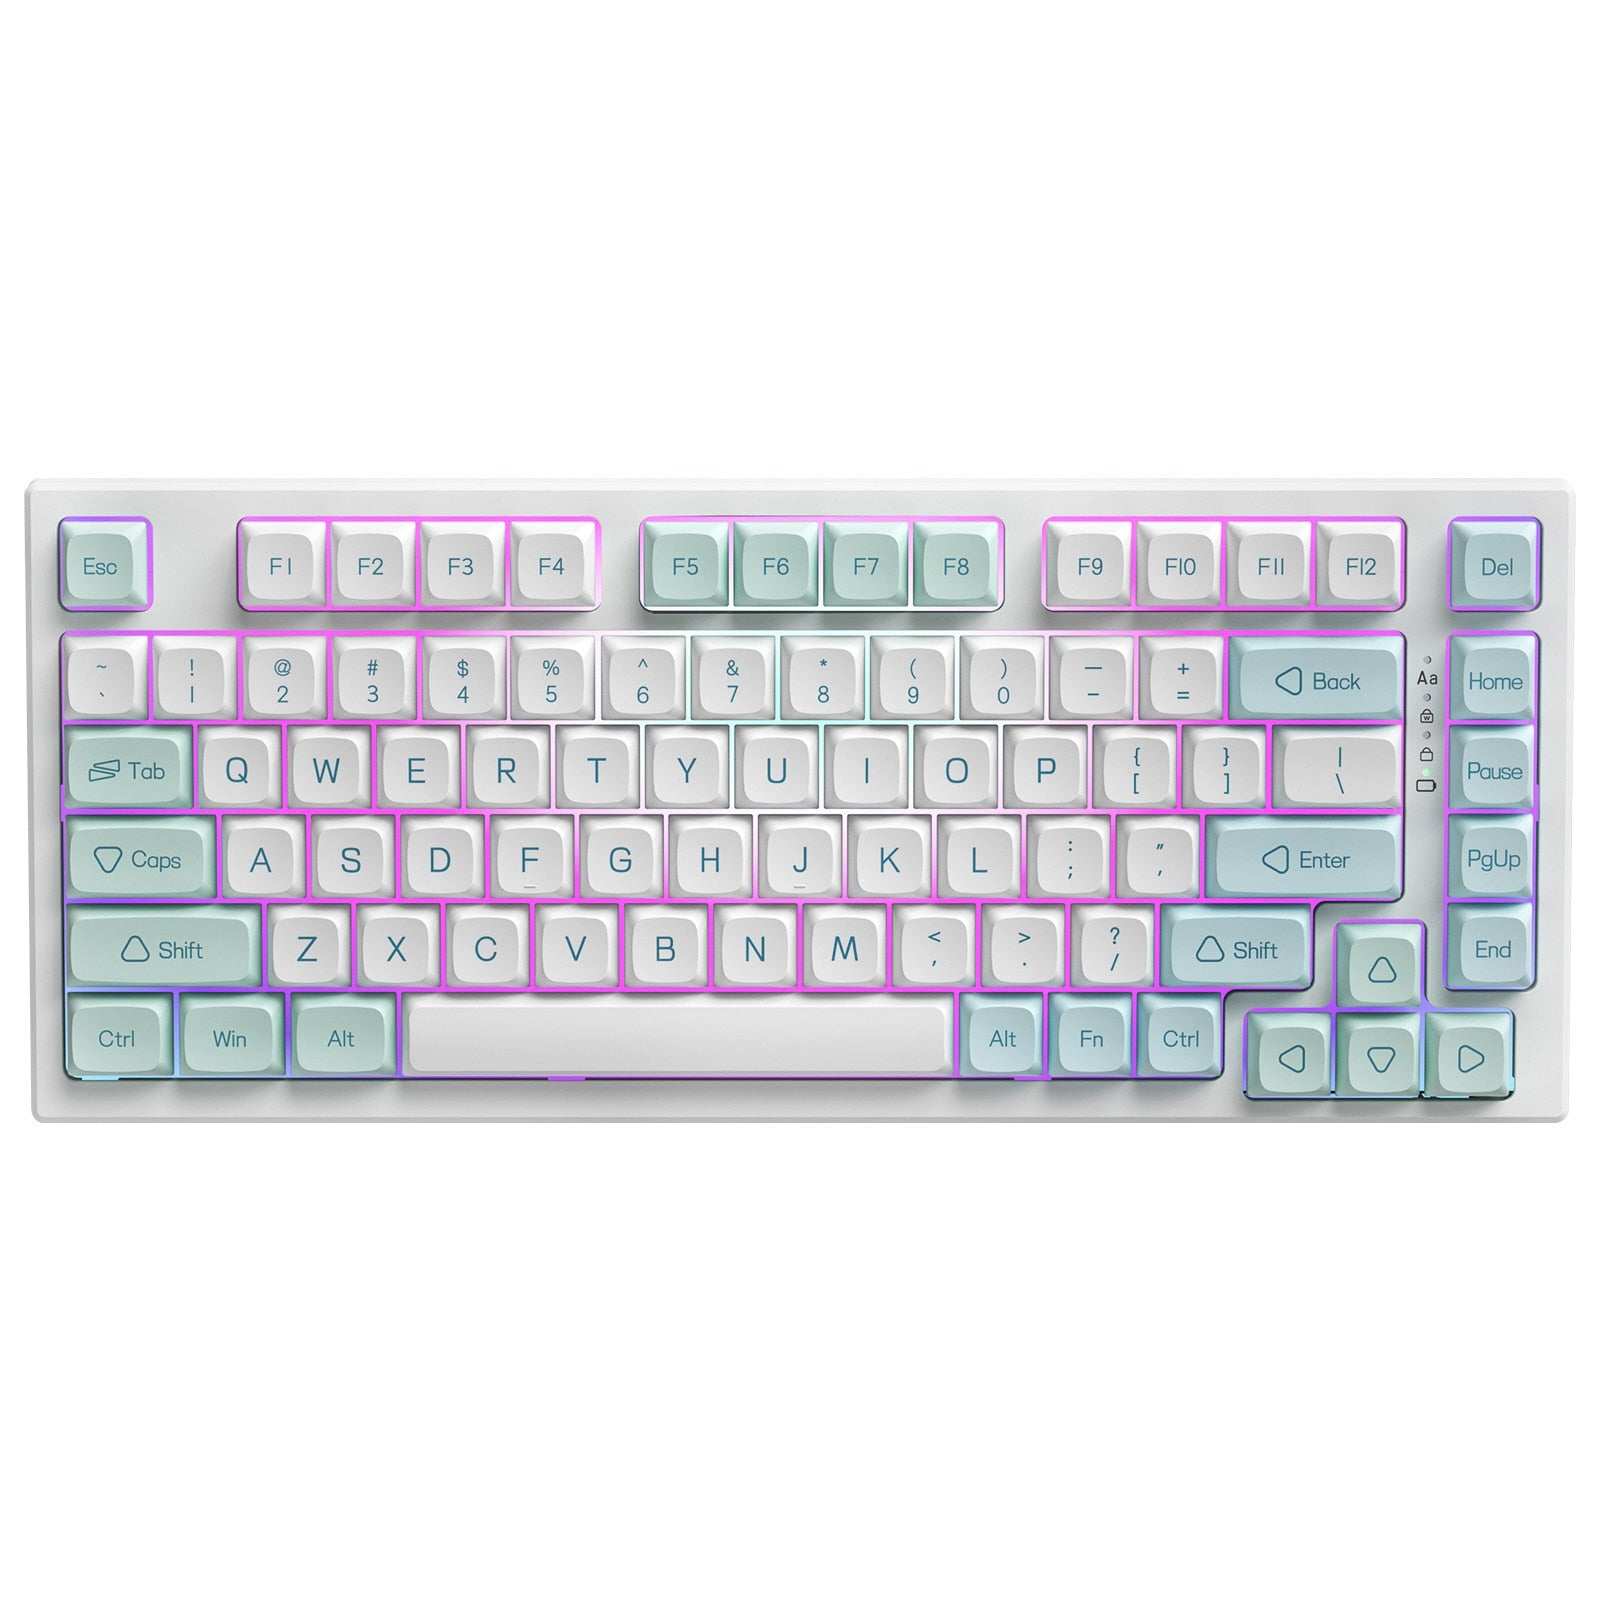 YUNZII YZ75 White 75% Hot Swappable Wireless Gaming Mechanical Keyboard, RGB Backlights, BT5.0/2.4G/USB-C, for Linux/Win/Mac